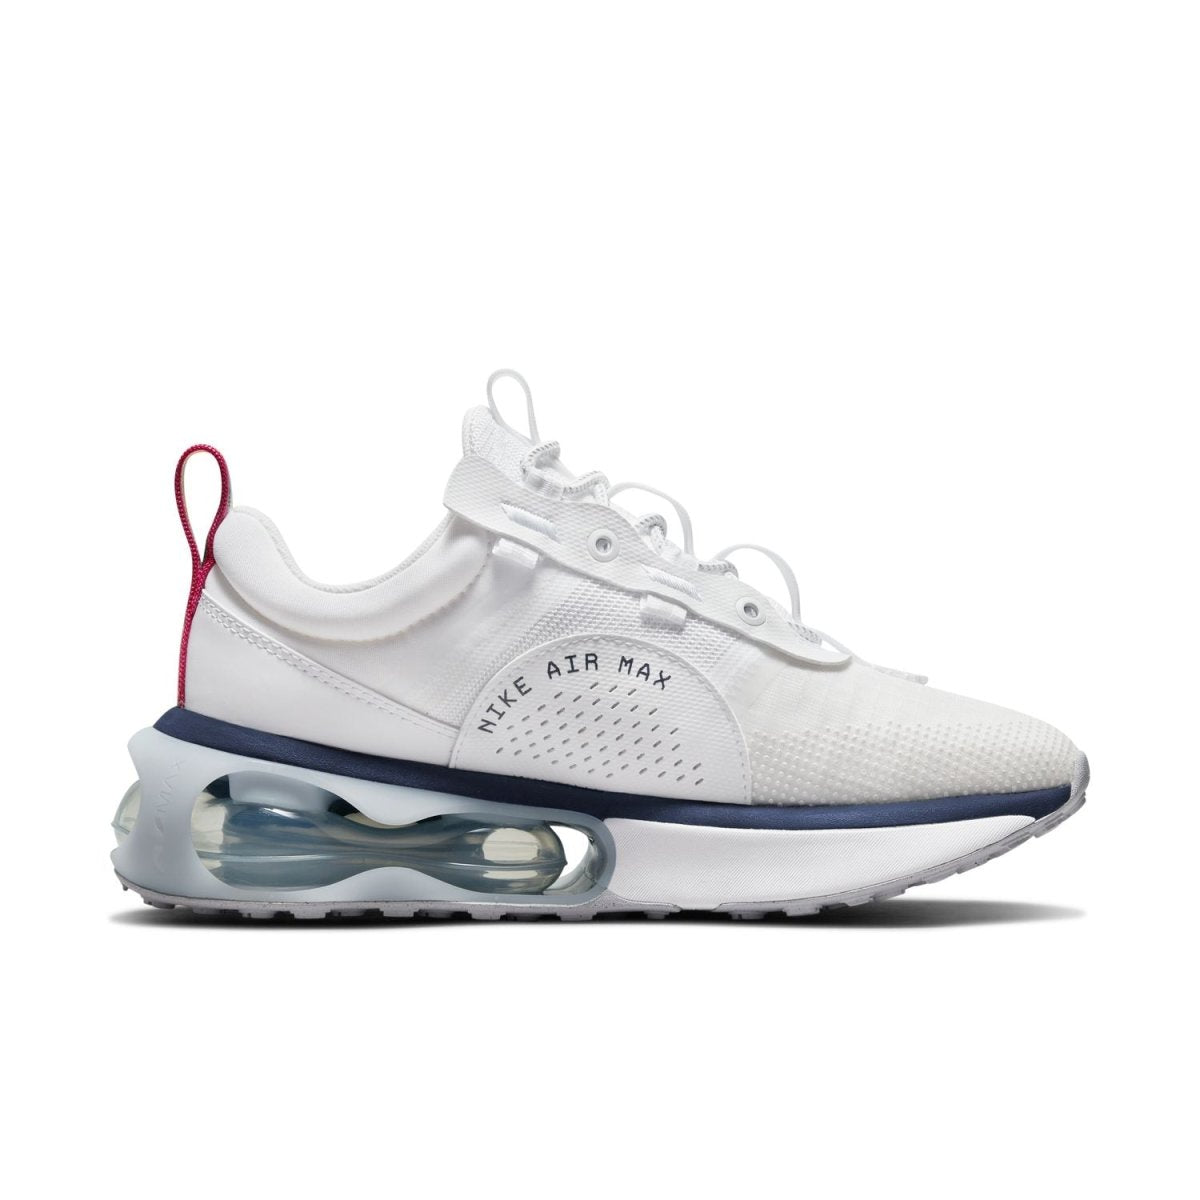  Nike womens Air Max 2021 Se Shoes, Photon Dust/Varsity Red/White/,  8.5